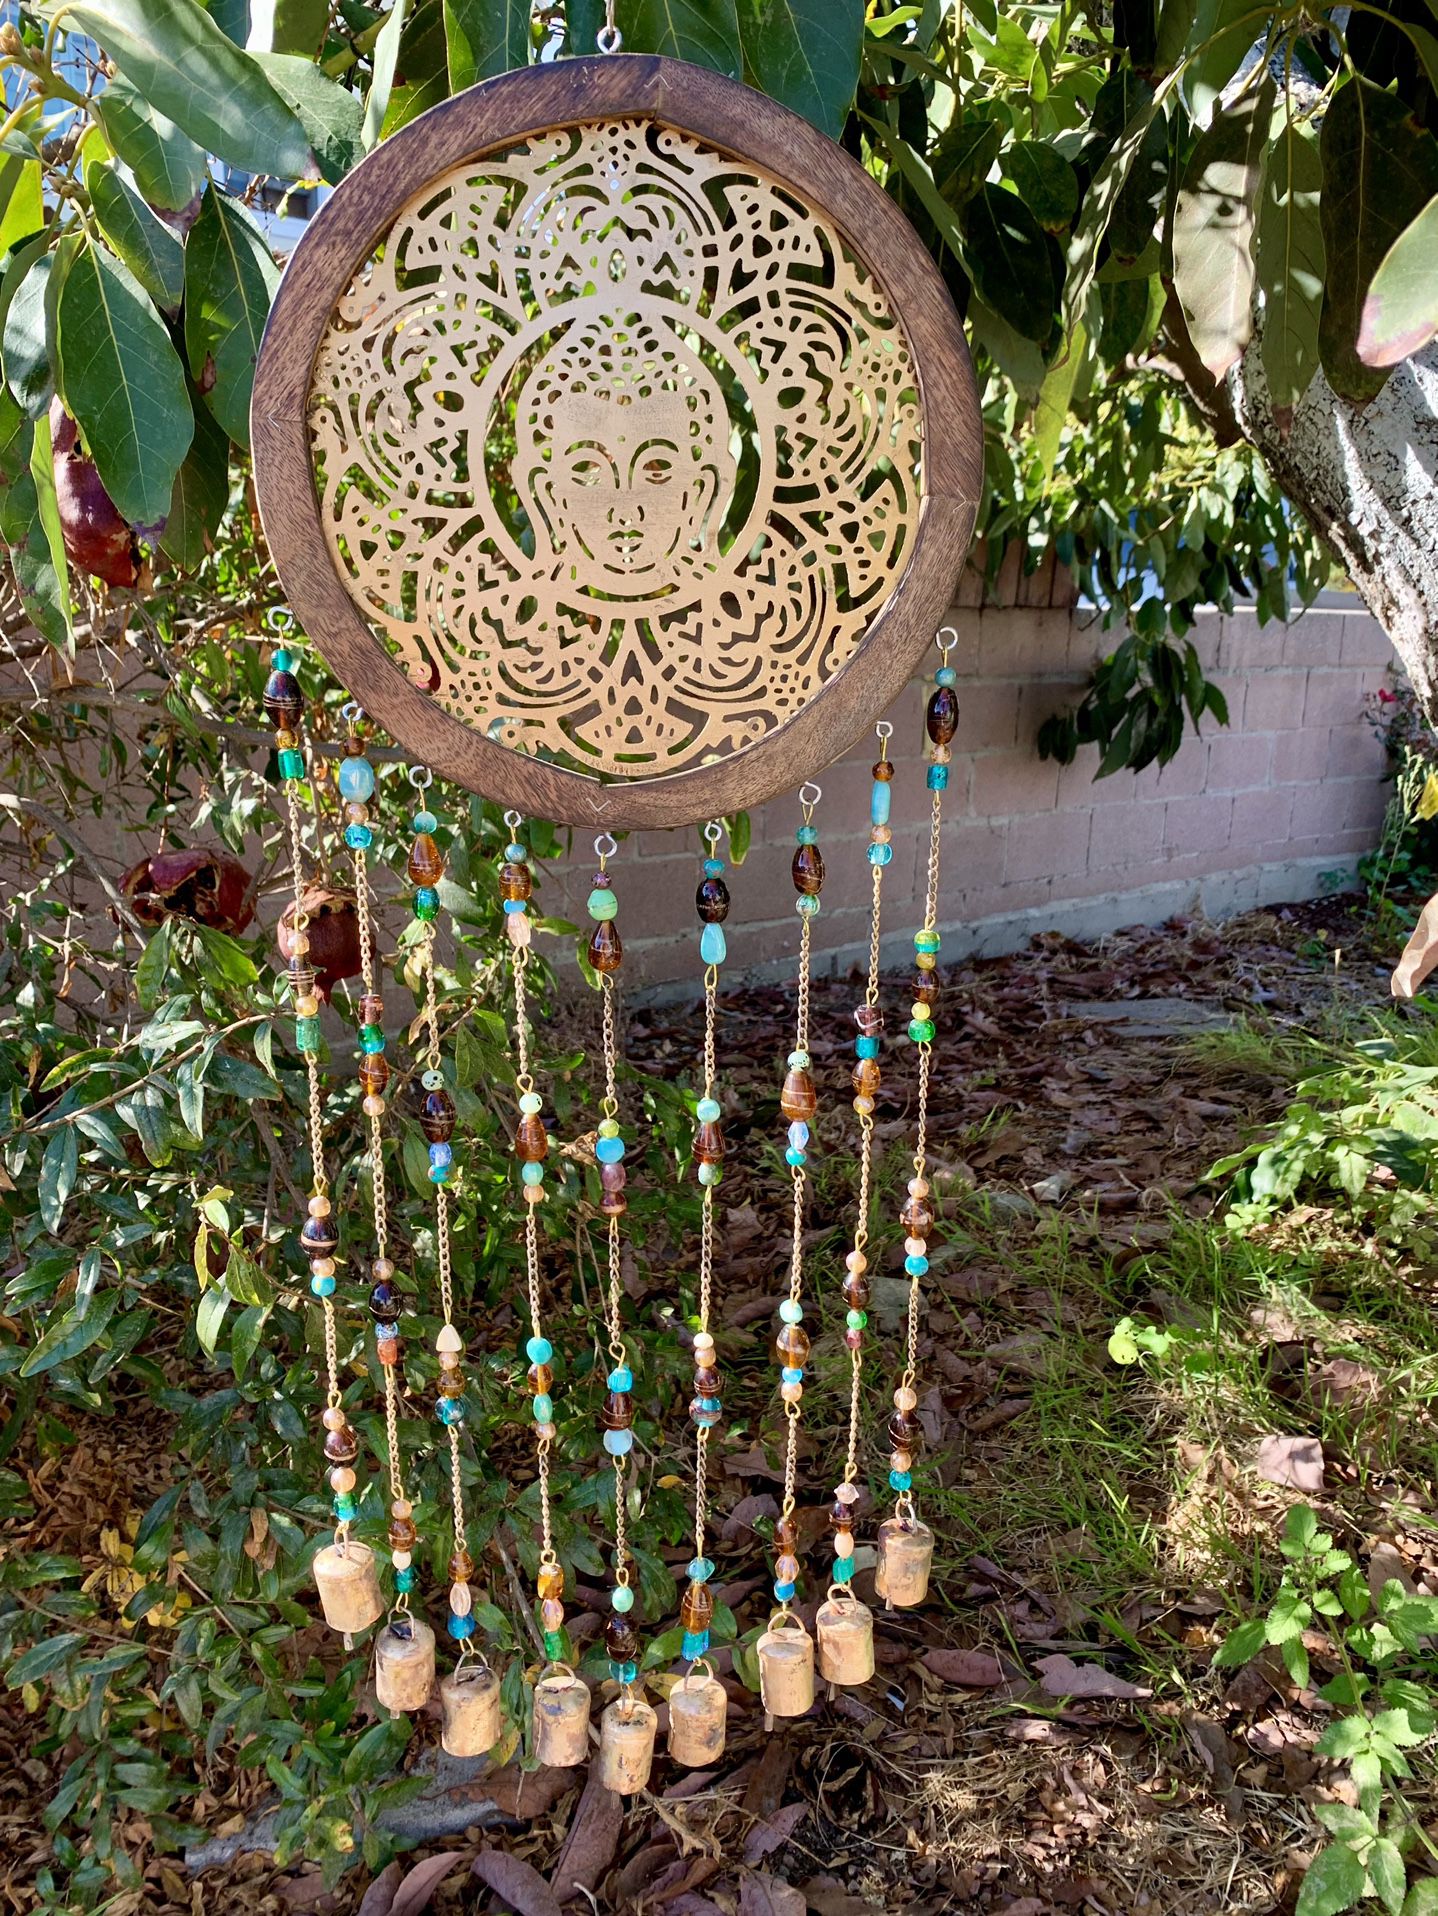 Amber Teal Large Buddha Mandala Wind Chime Sun Catcher Mobile With Glass Beads